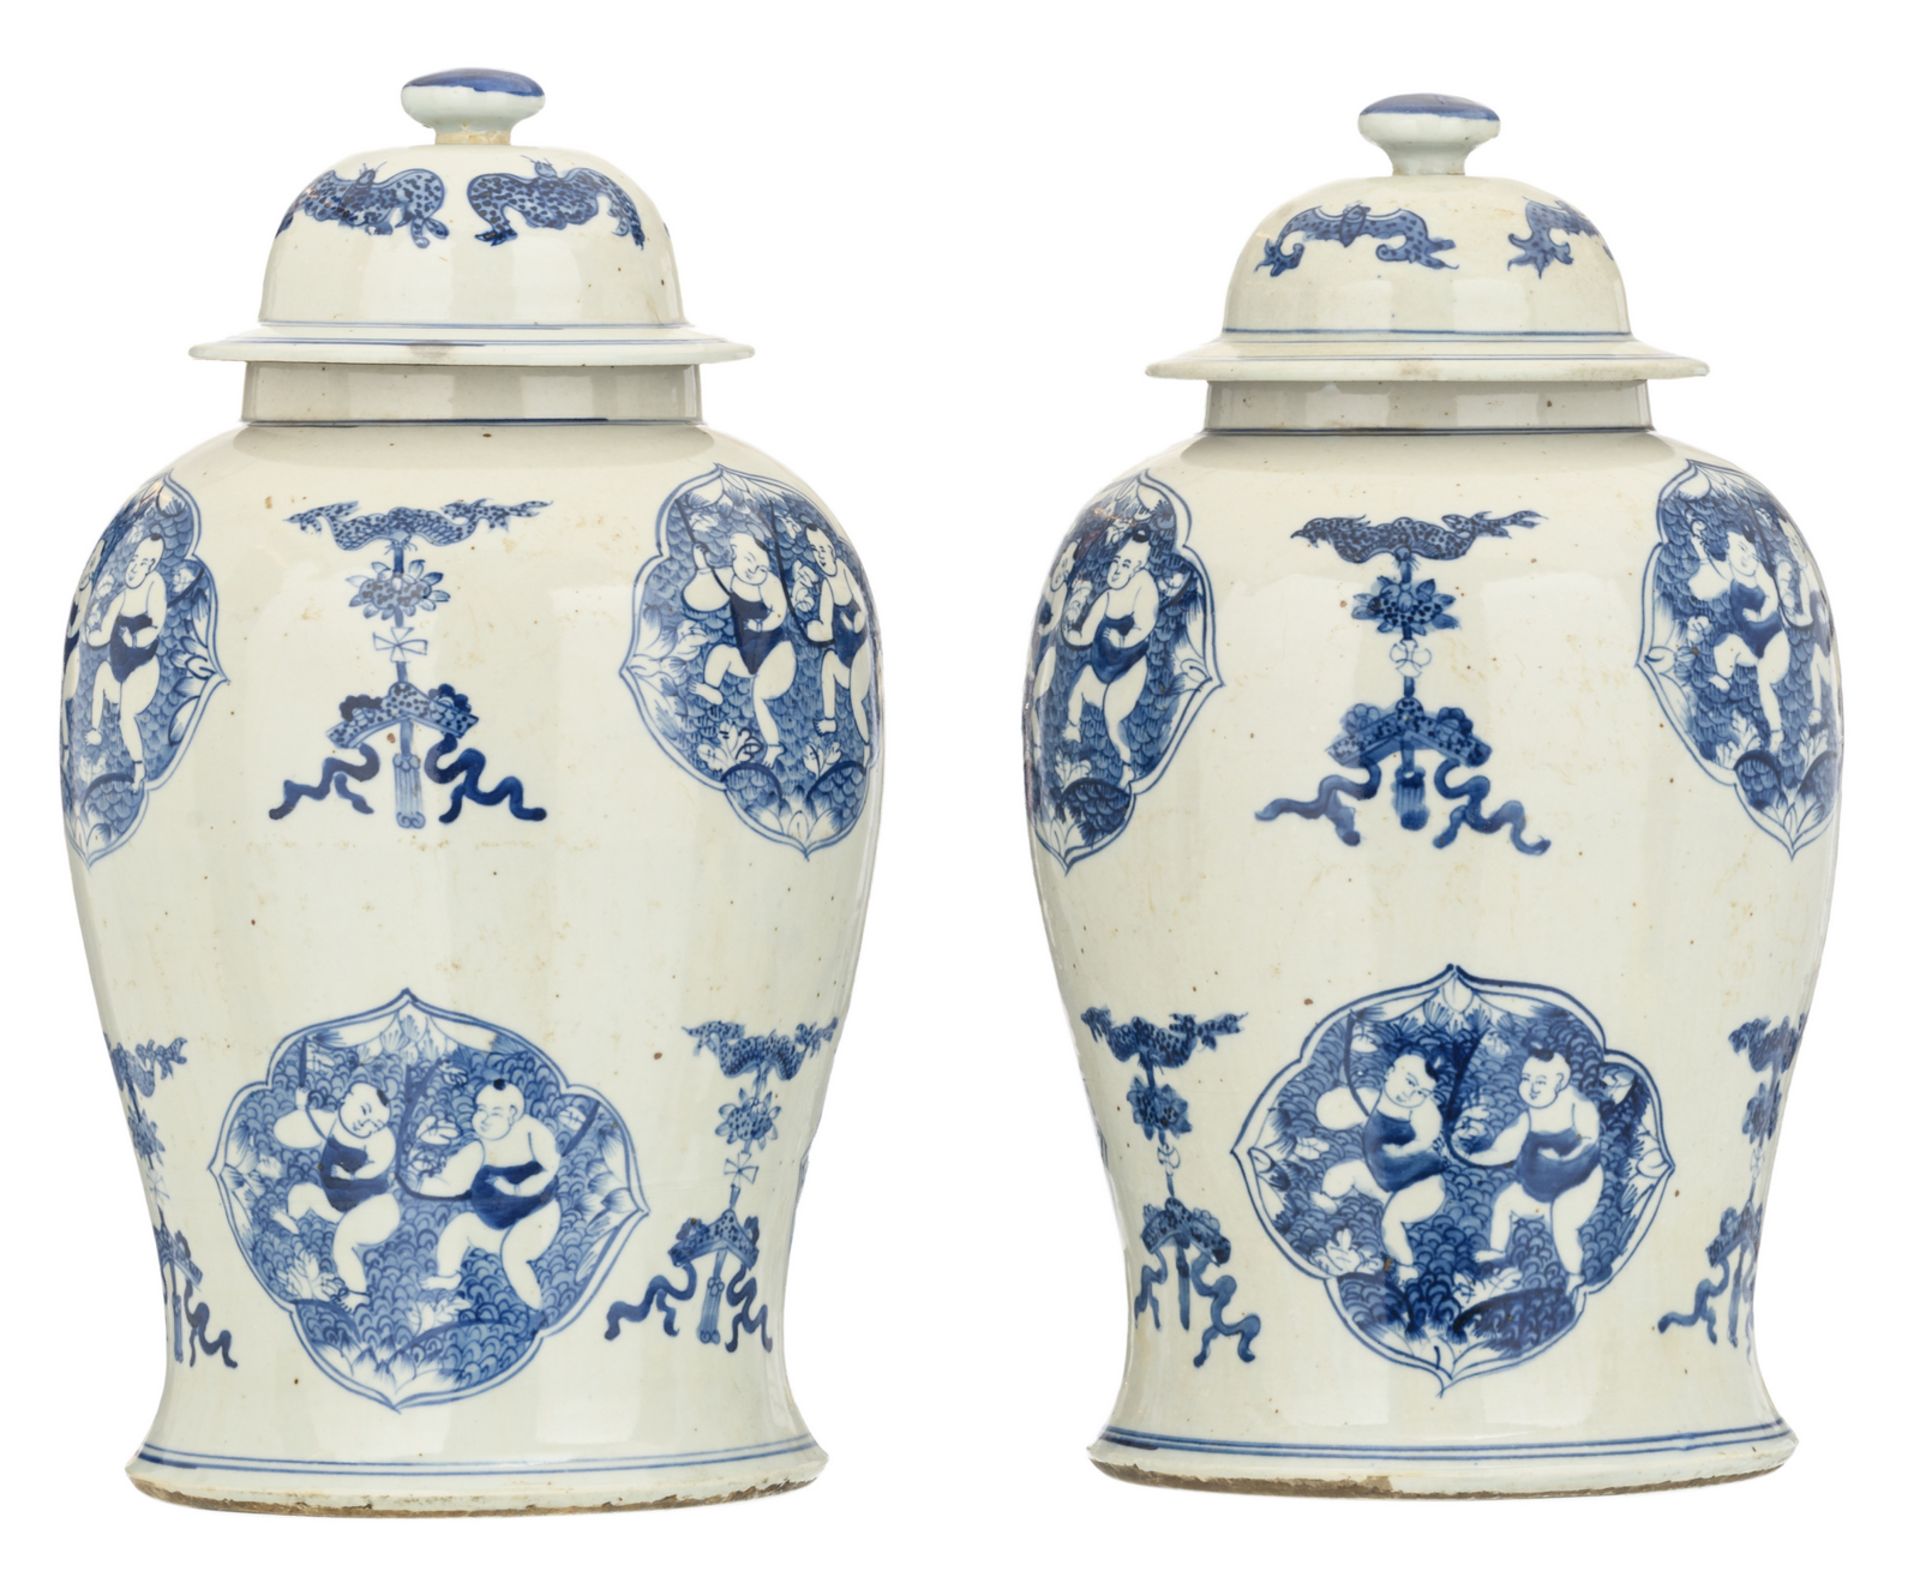 A pair of Chinese blue and white decorated vases and covers with auspicious symbols, the roundels